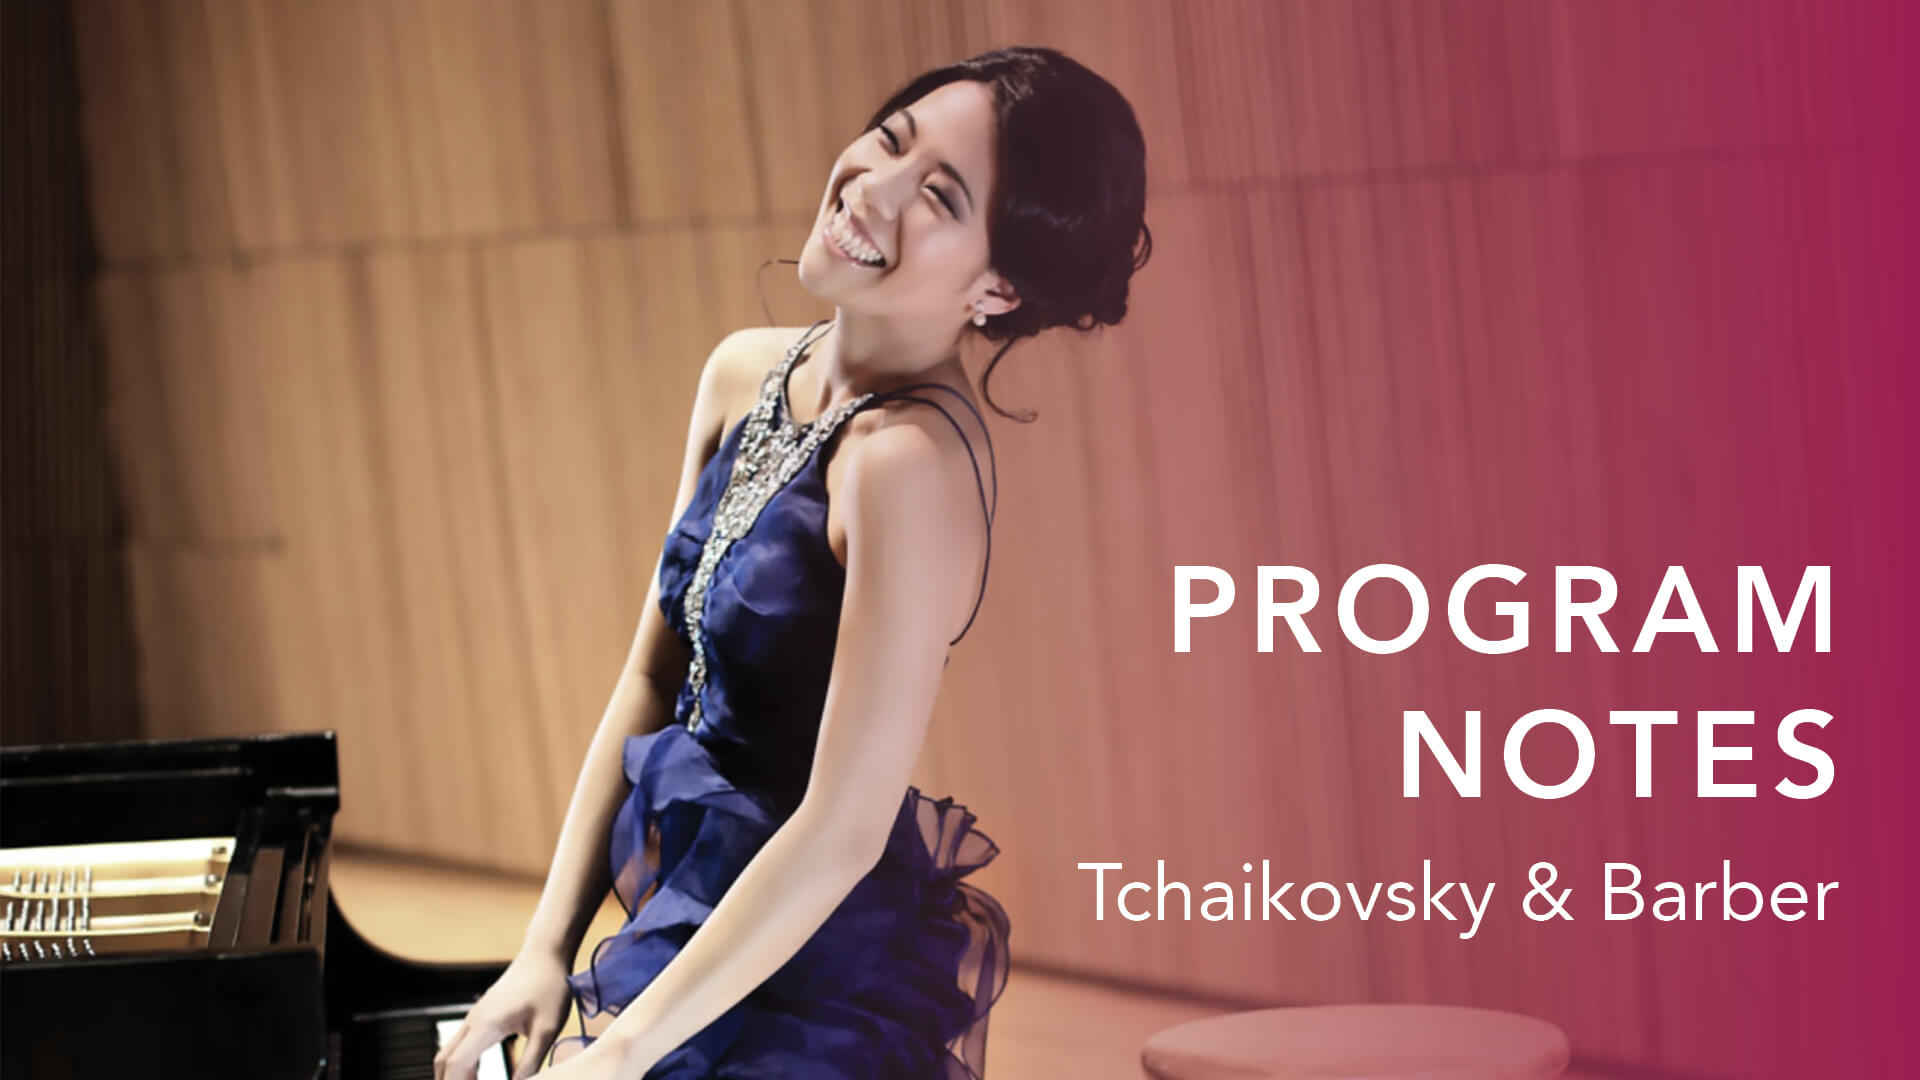 Featured image for “Program Notes: Tchaikovsky & Barber”